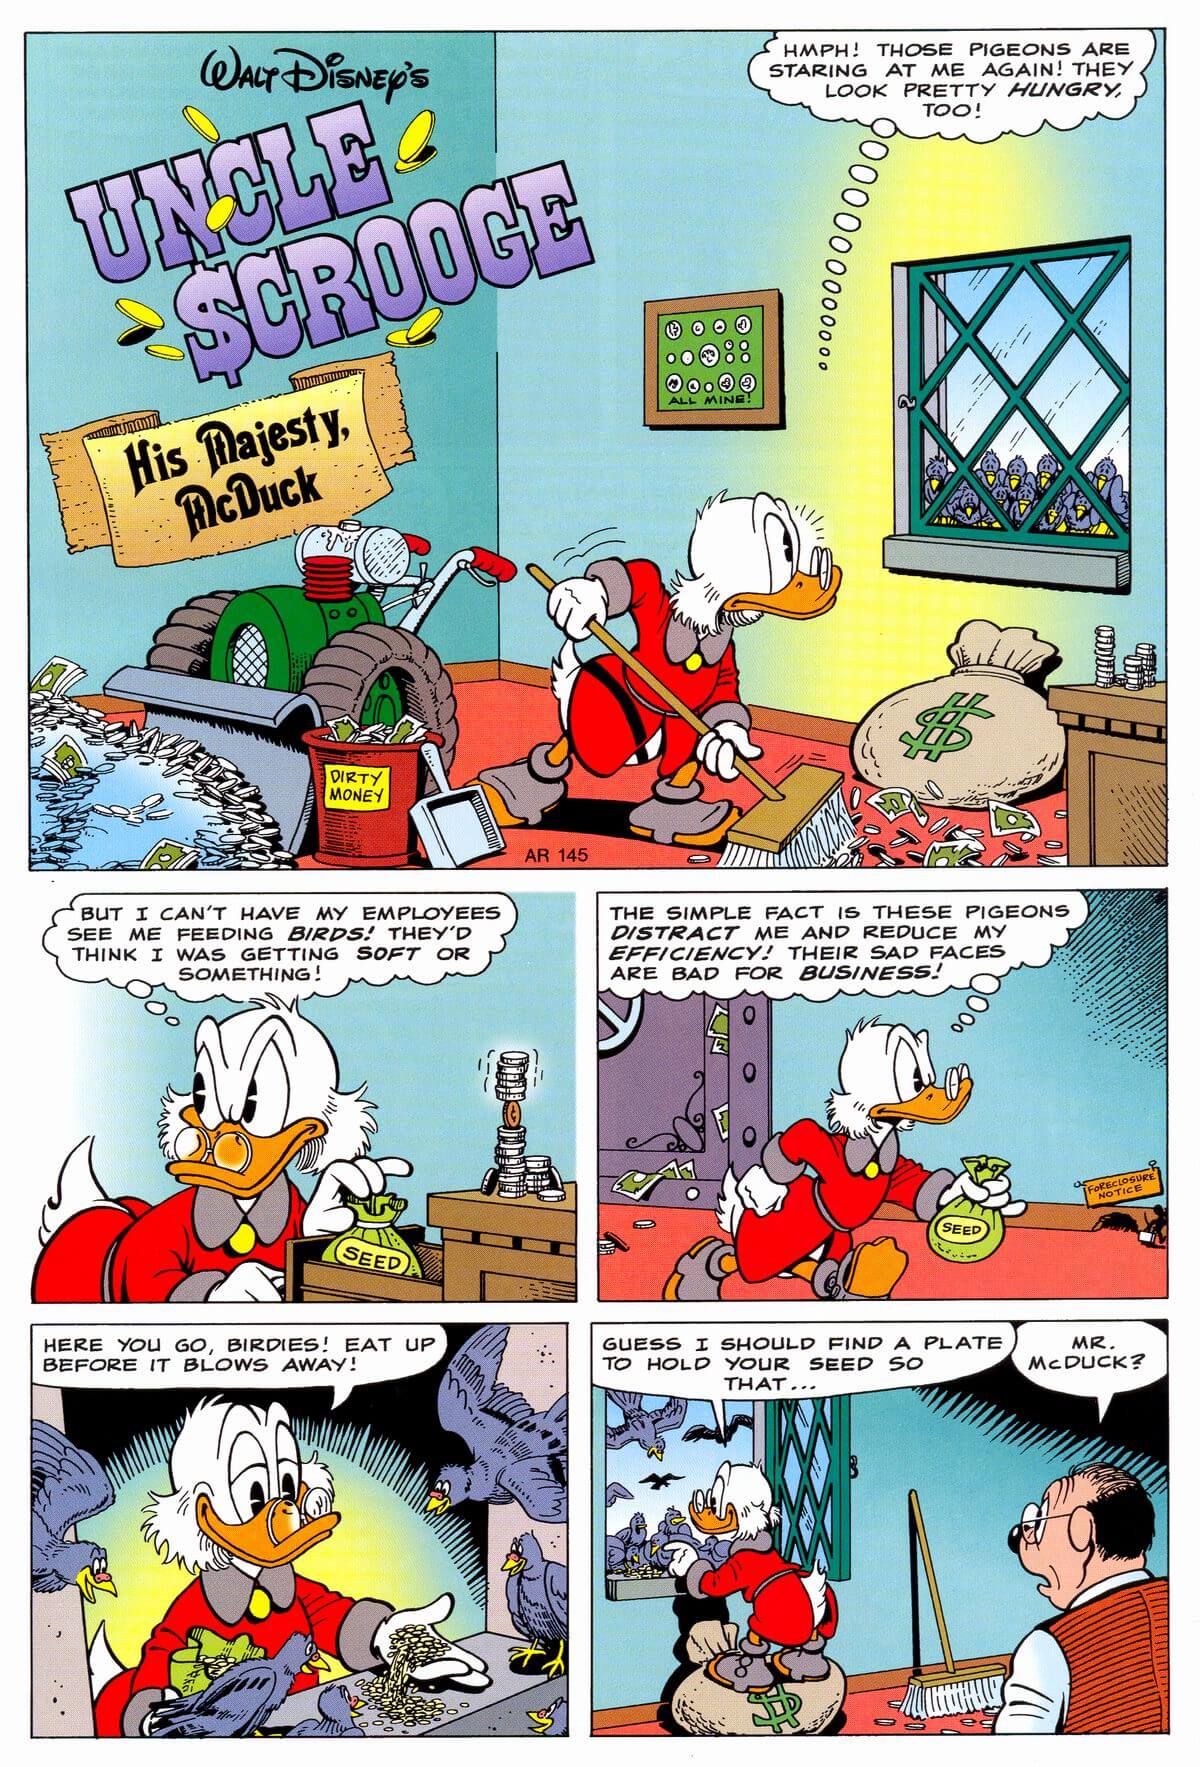 His Majesty McDuck first page